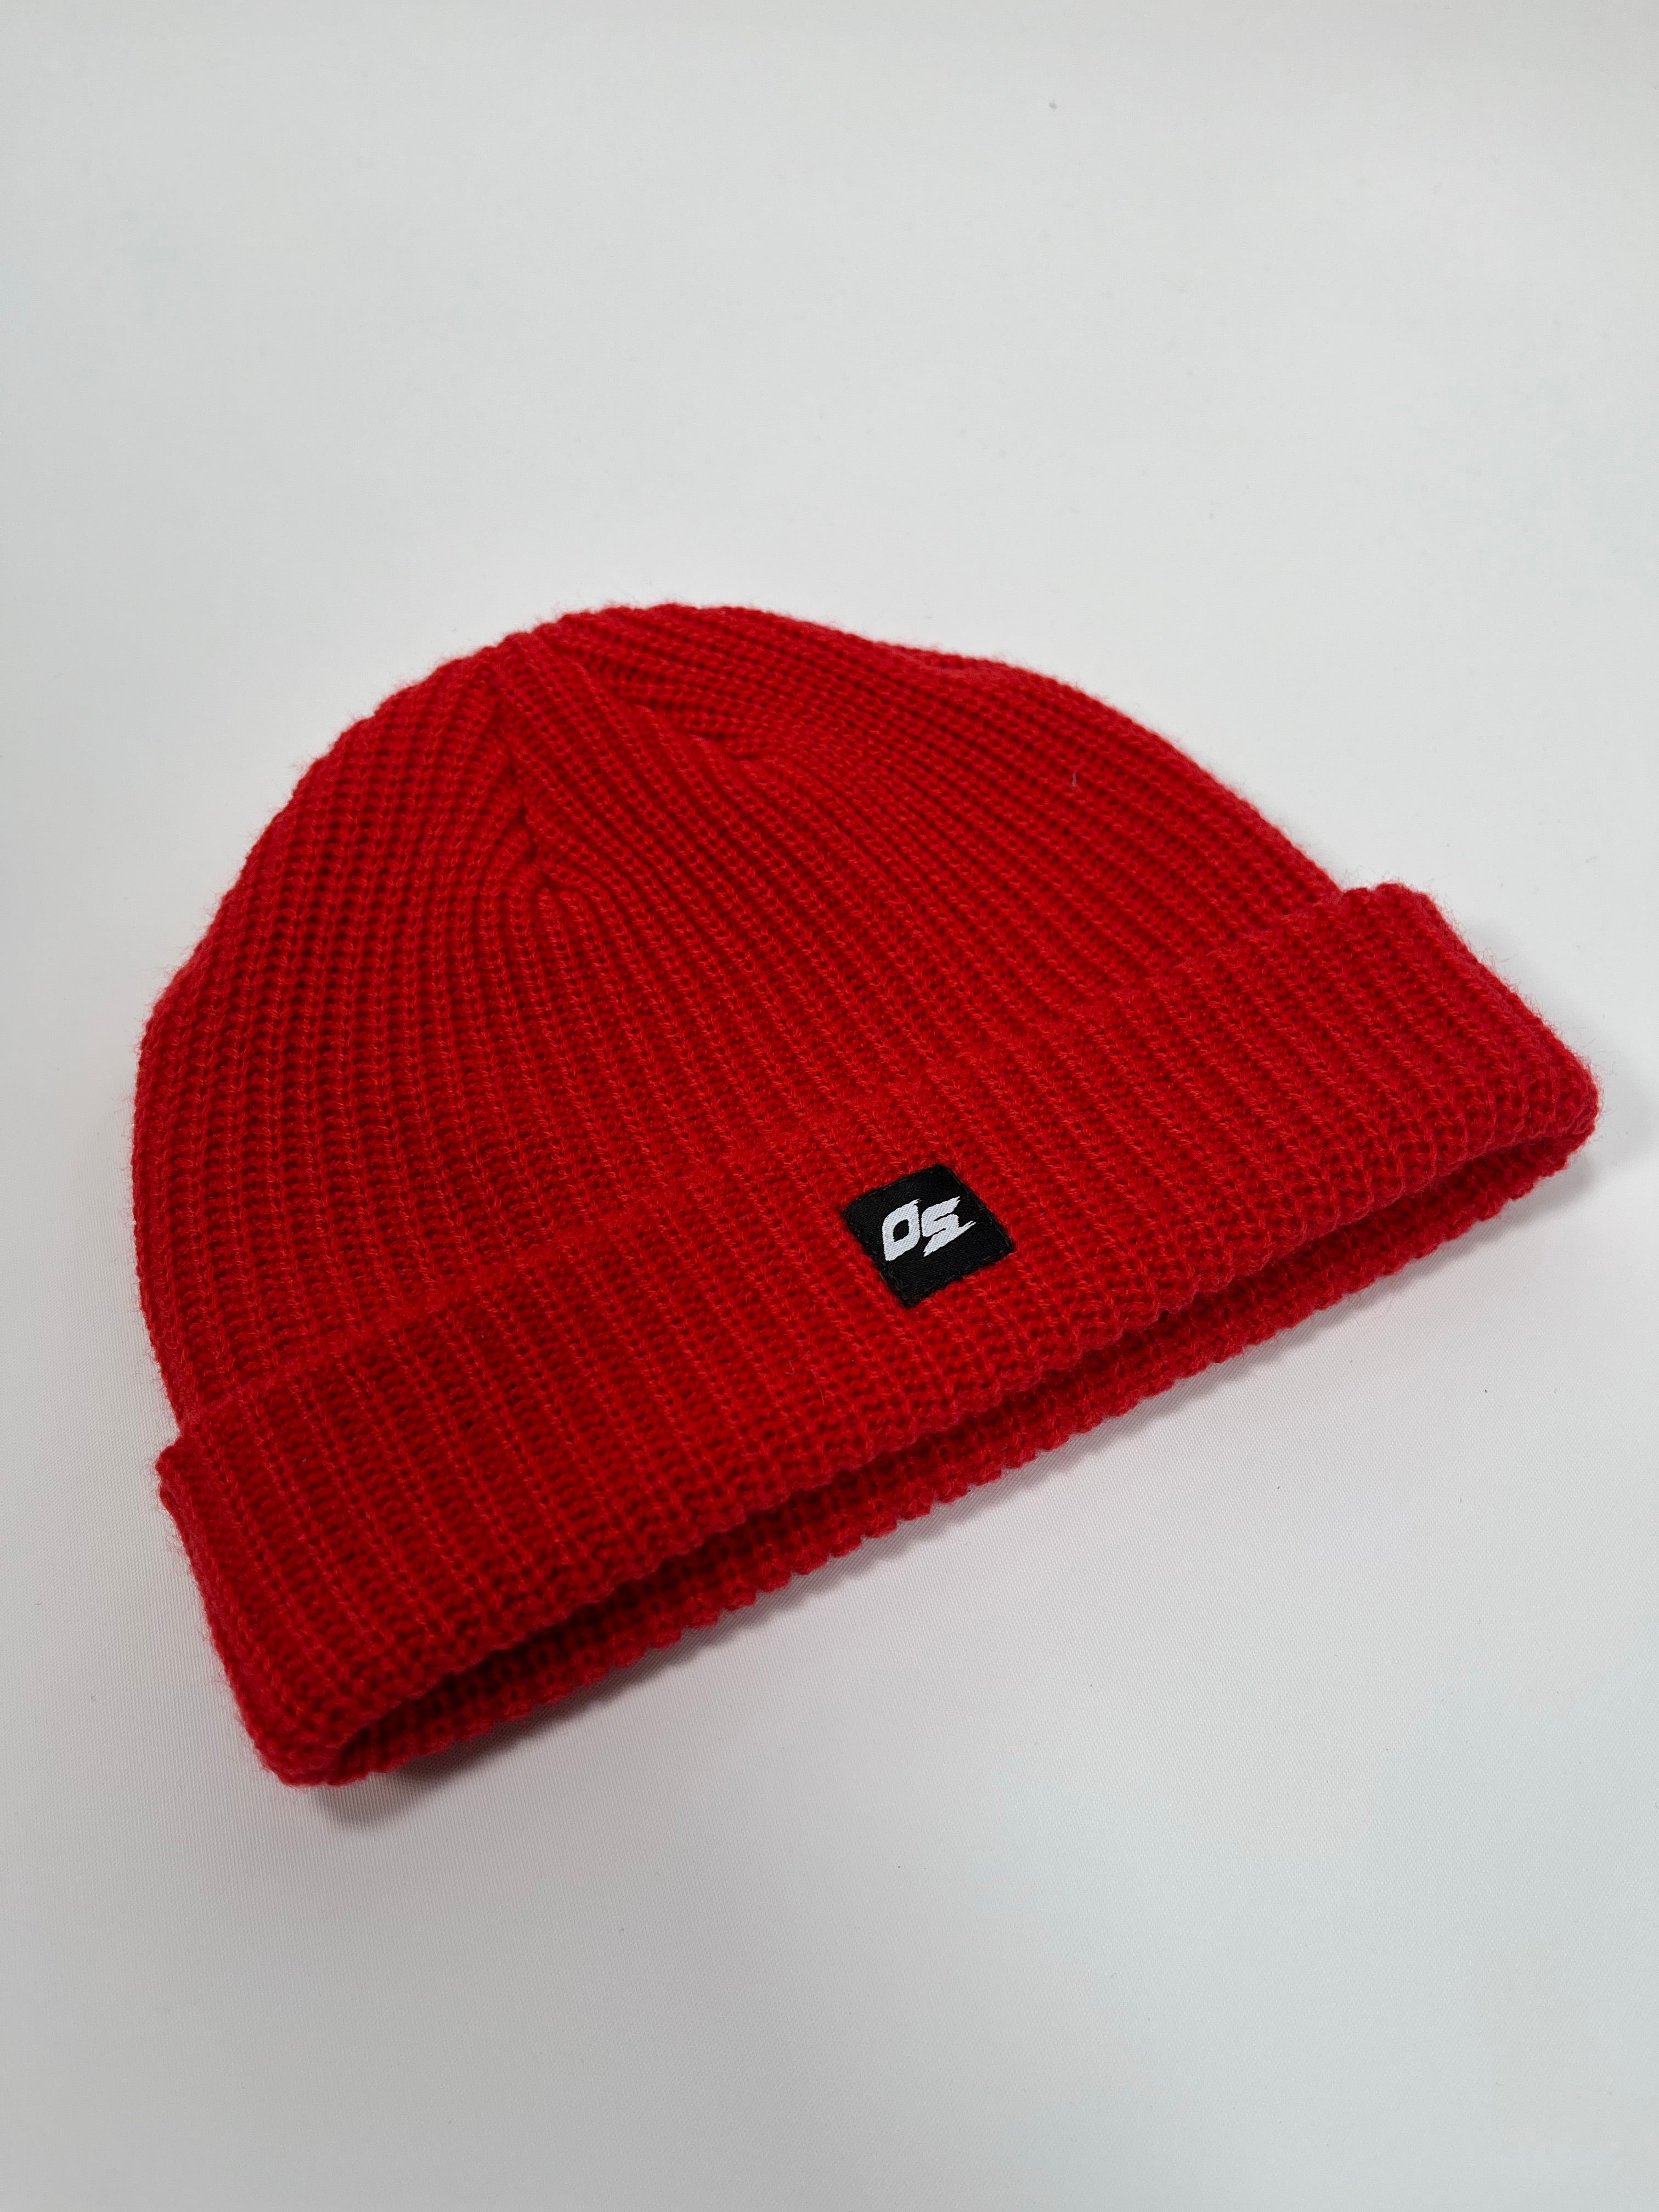 OS® CABLE BEANIE- red – OTSDR SPORTS